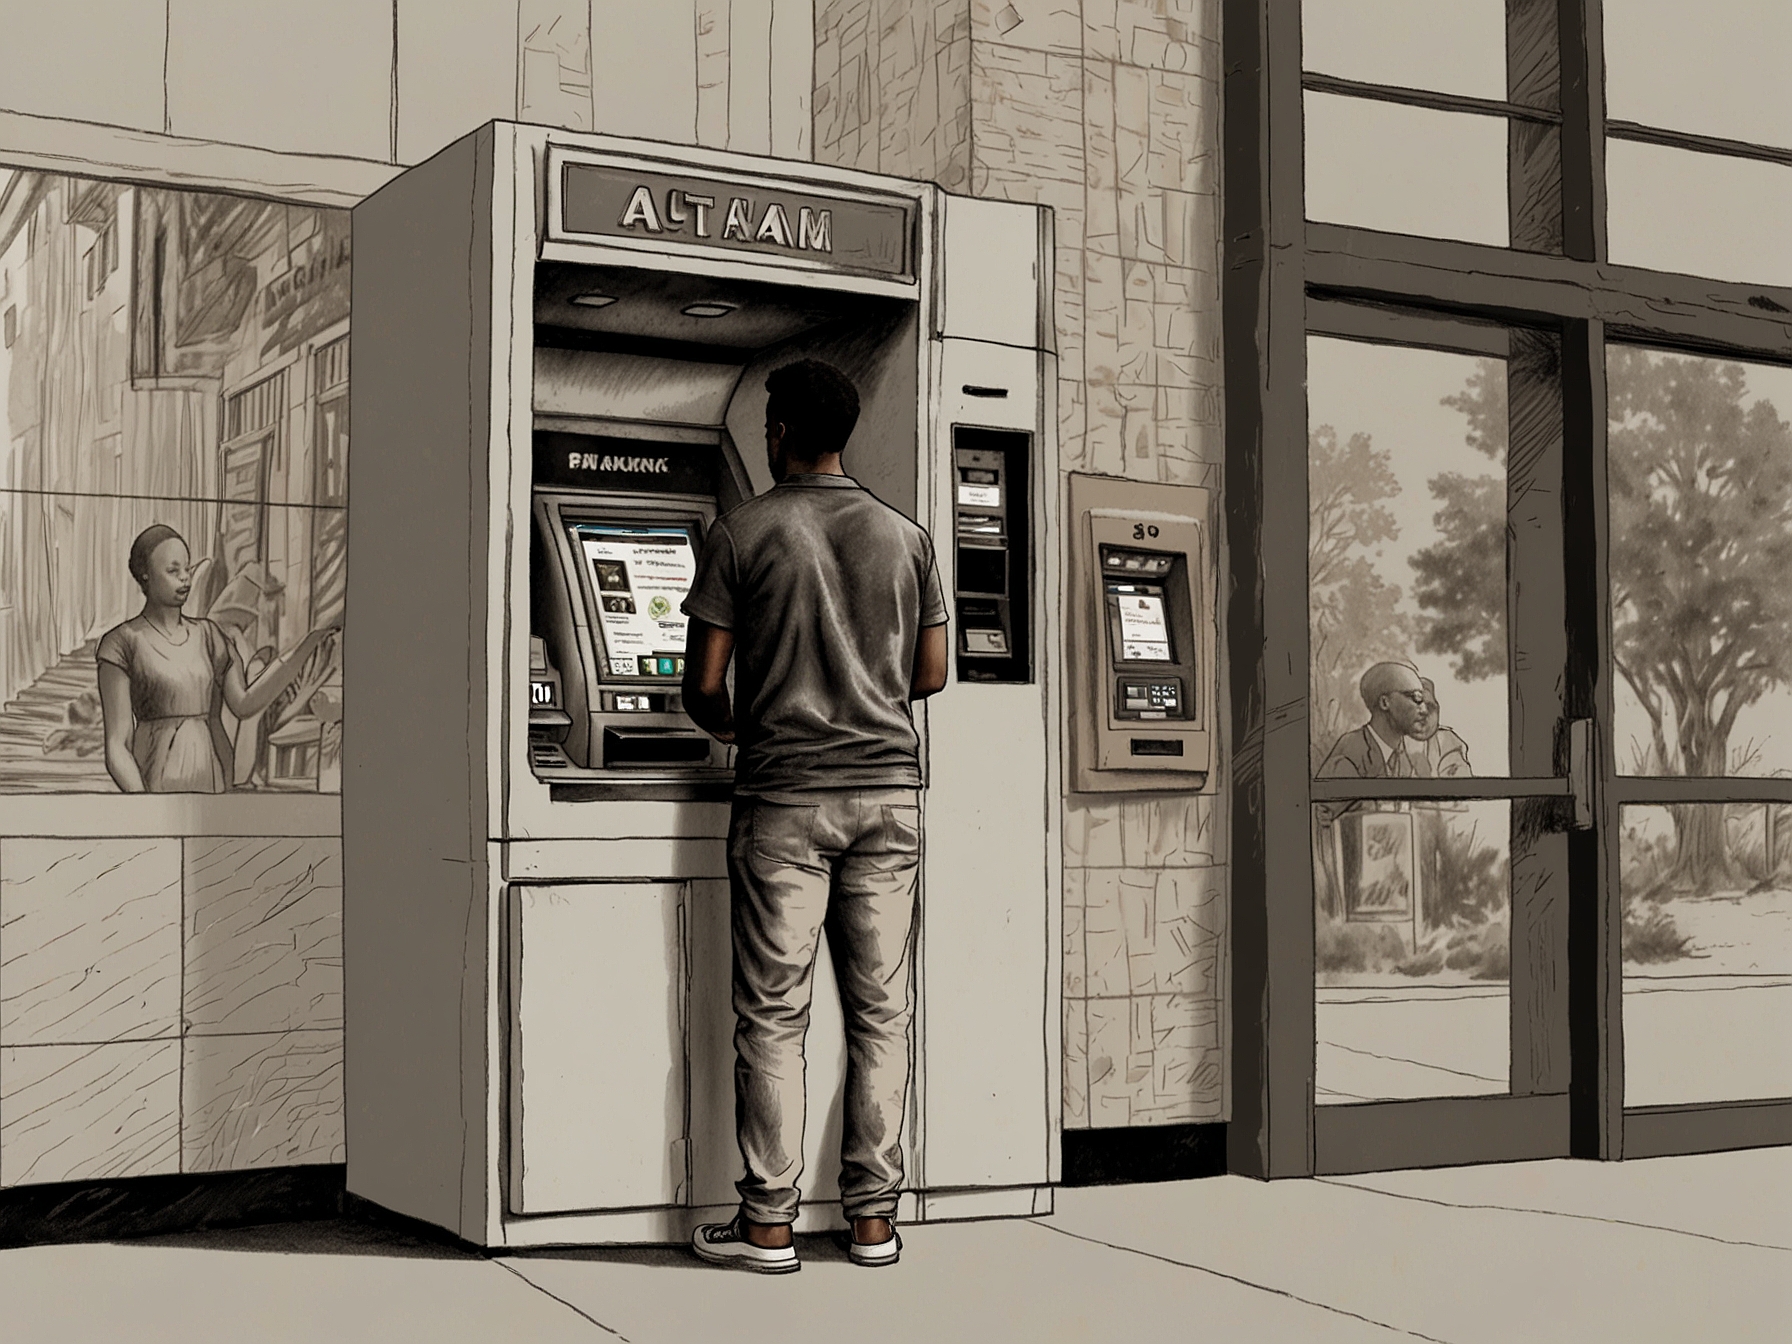 An ATM machine with a user withdrawing cash, representing the banking adjustments during Juneteenth. Online banking remains available, while physical branches close.